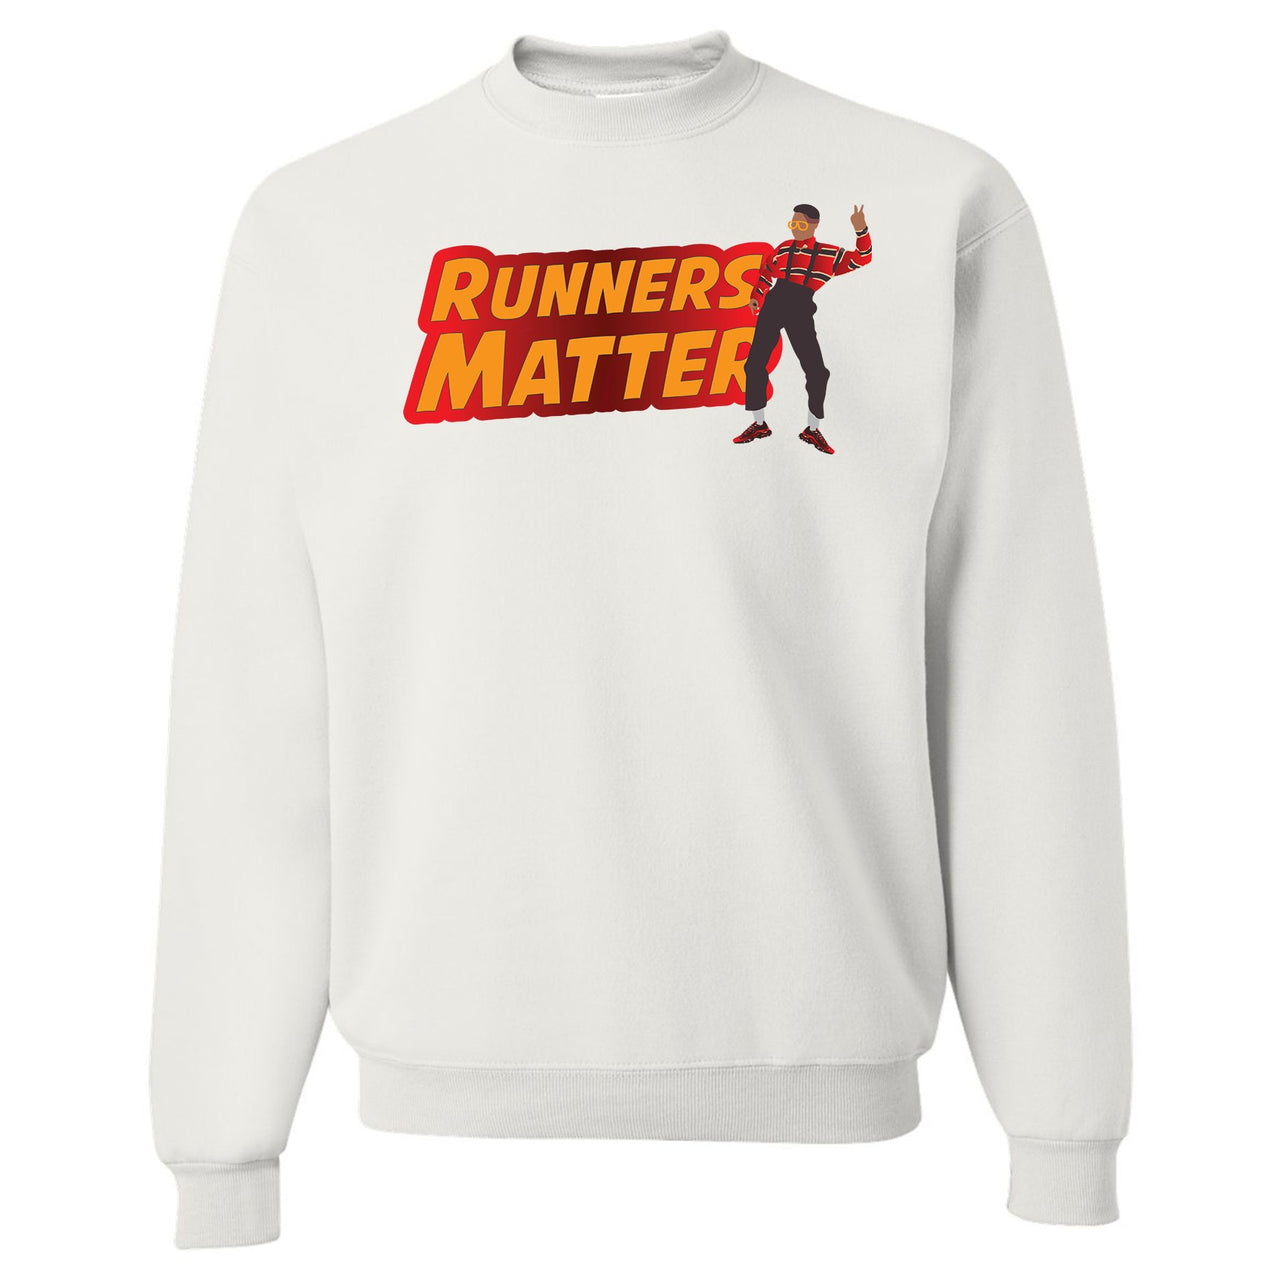 printed on the front of the air max plus sunburst sneaker matching white crewneck sweatshirt is the runners matter logo